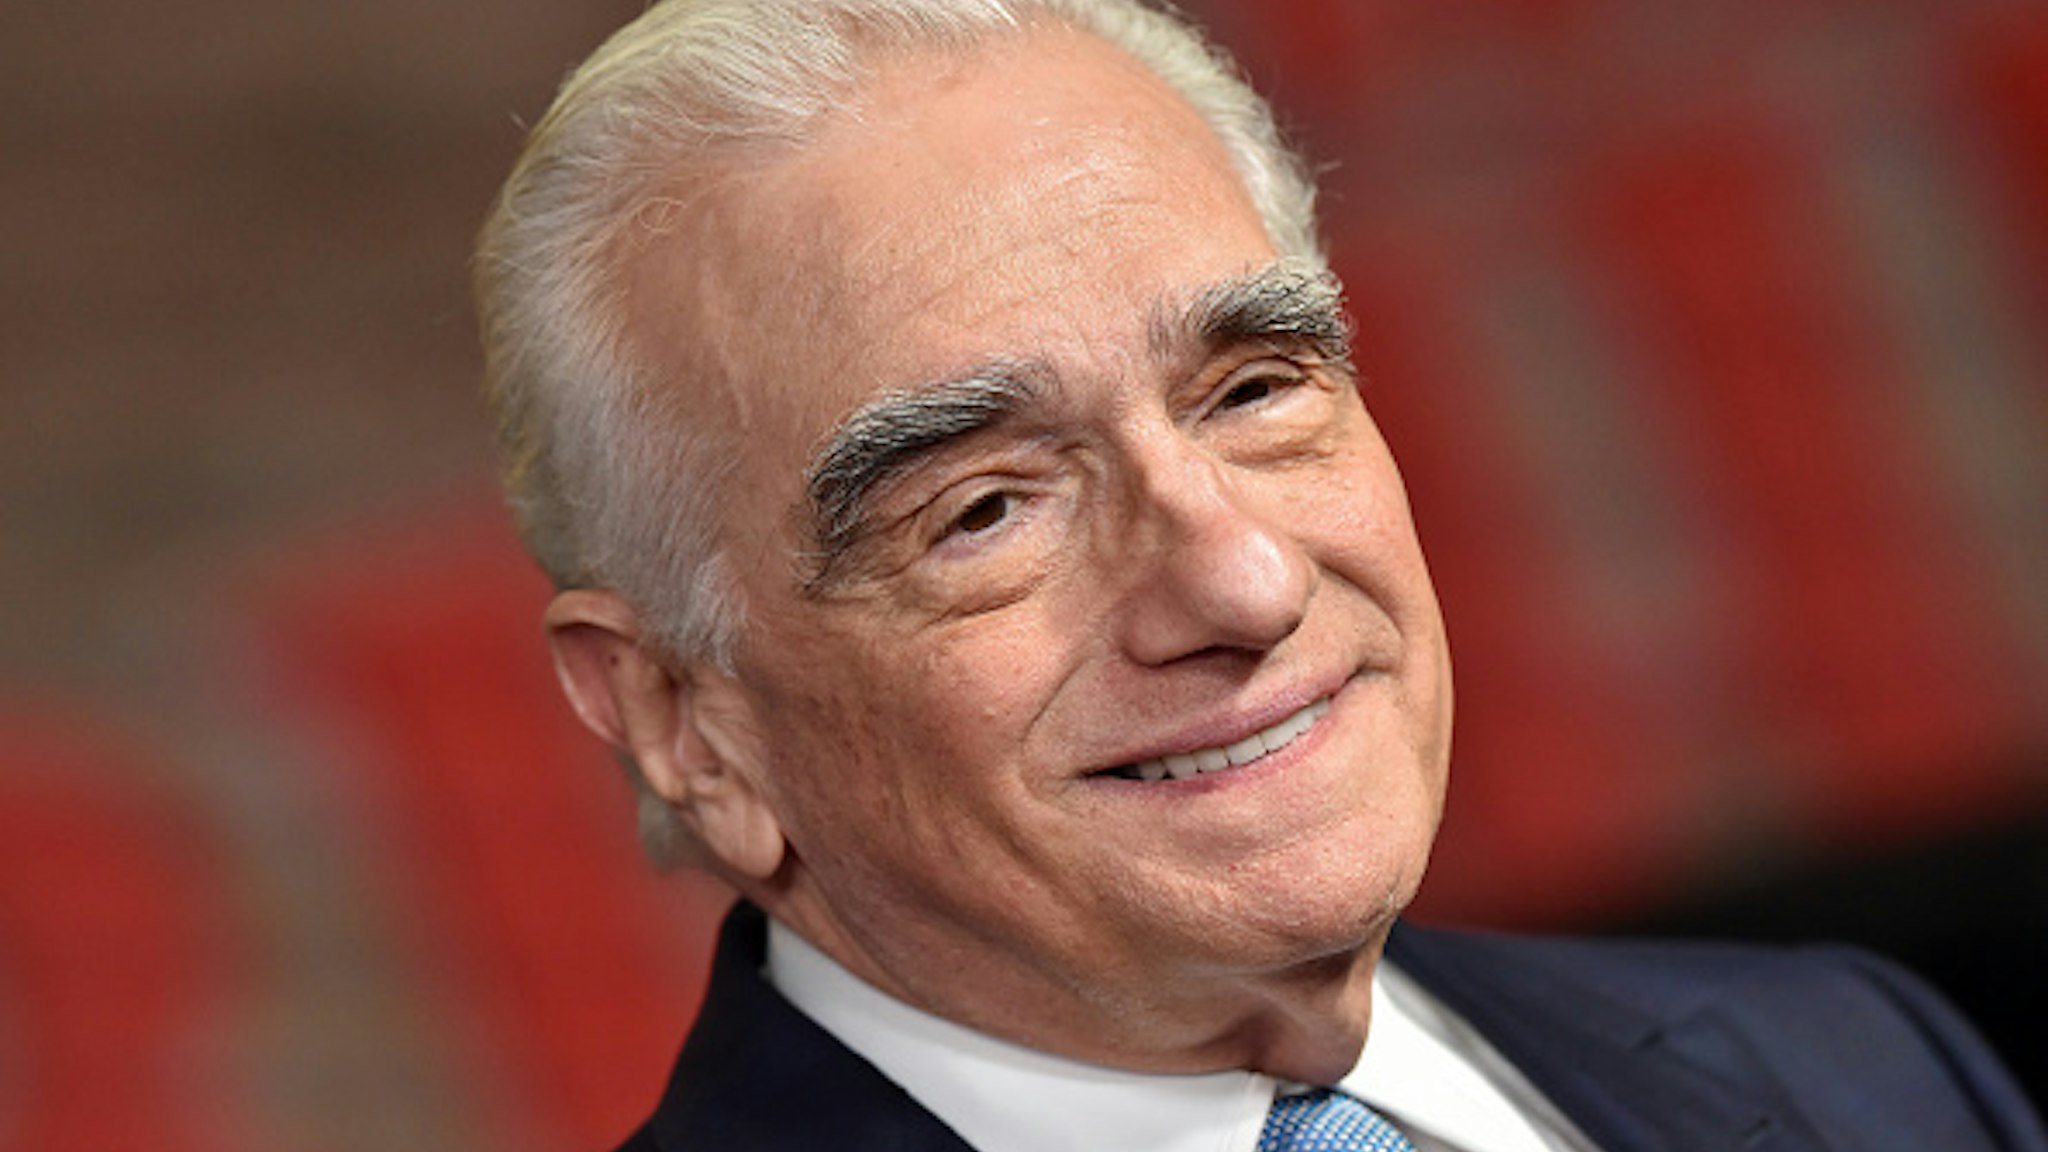 Martin Scorsese attends the Premiere of Netflix's "The Irishman" at TCL Chinese Theatre on October 24, 2019 in Hollywood, California.